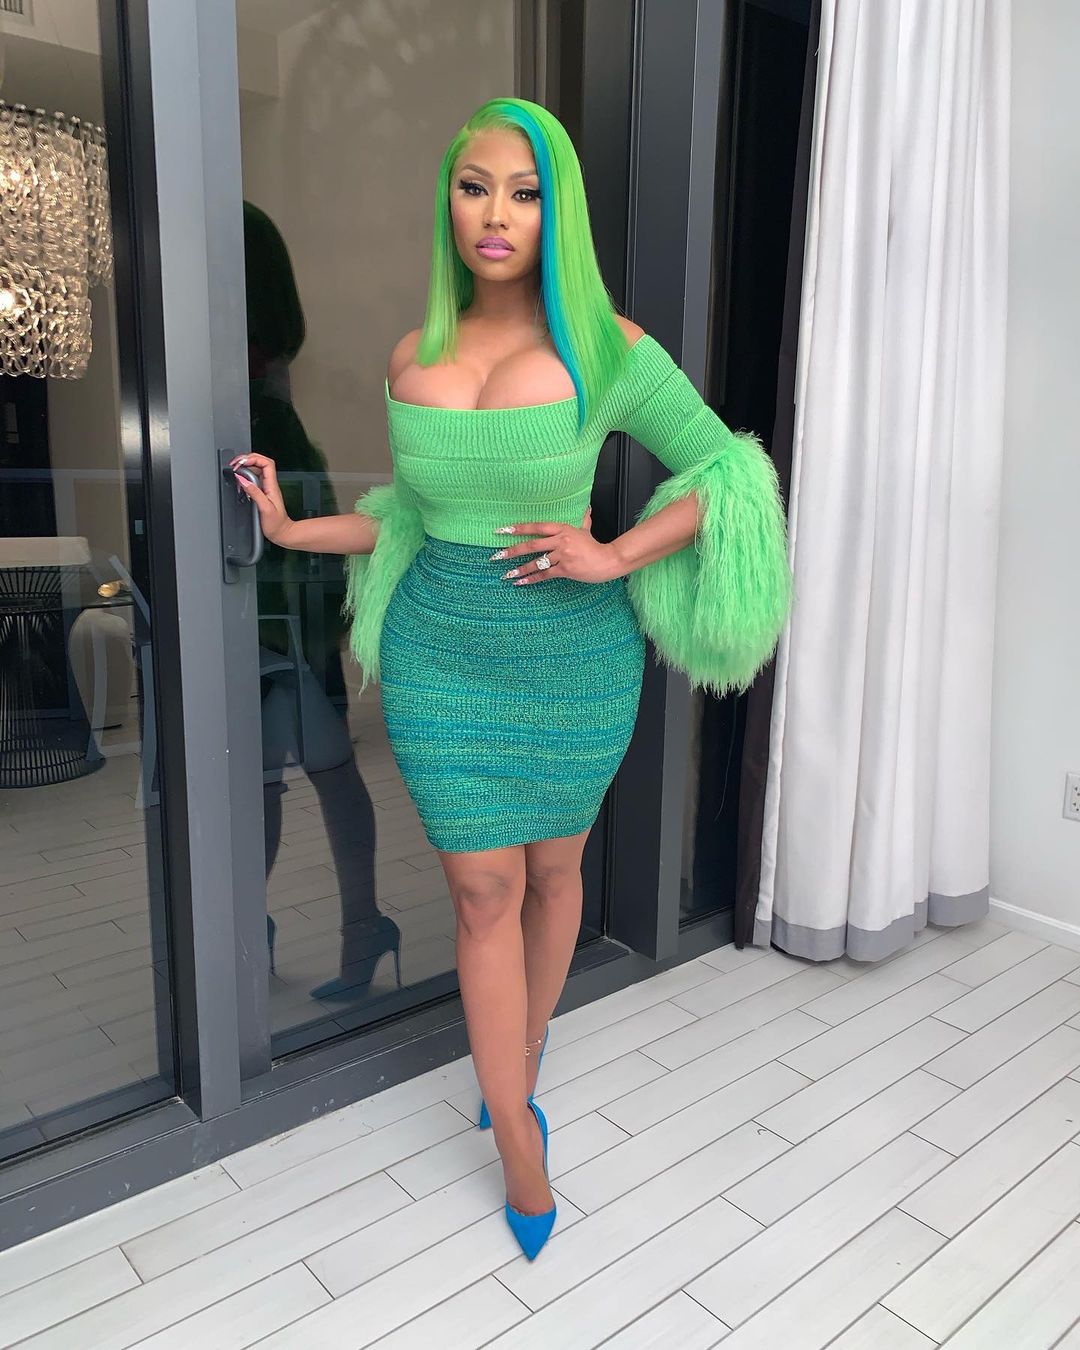 A photo showing Nicki Minaj in a reen off-shoulder outfit, paired with a green shirt and matching hair.